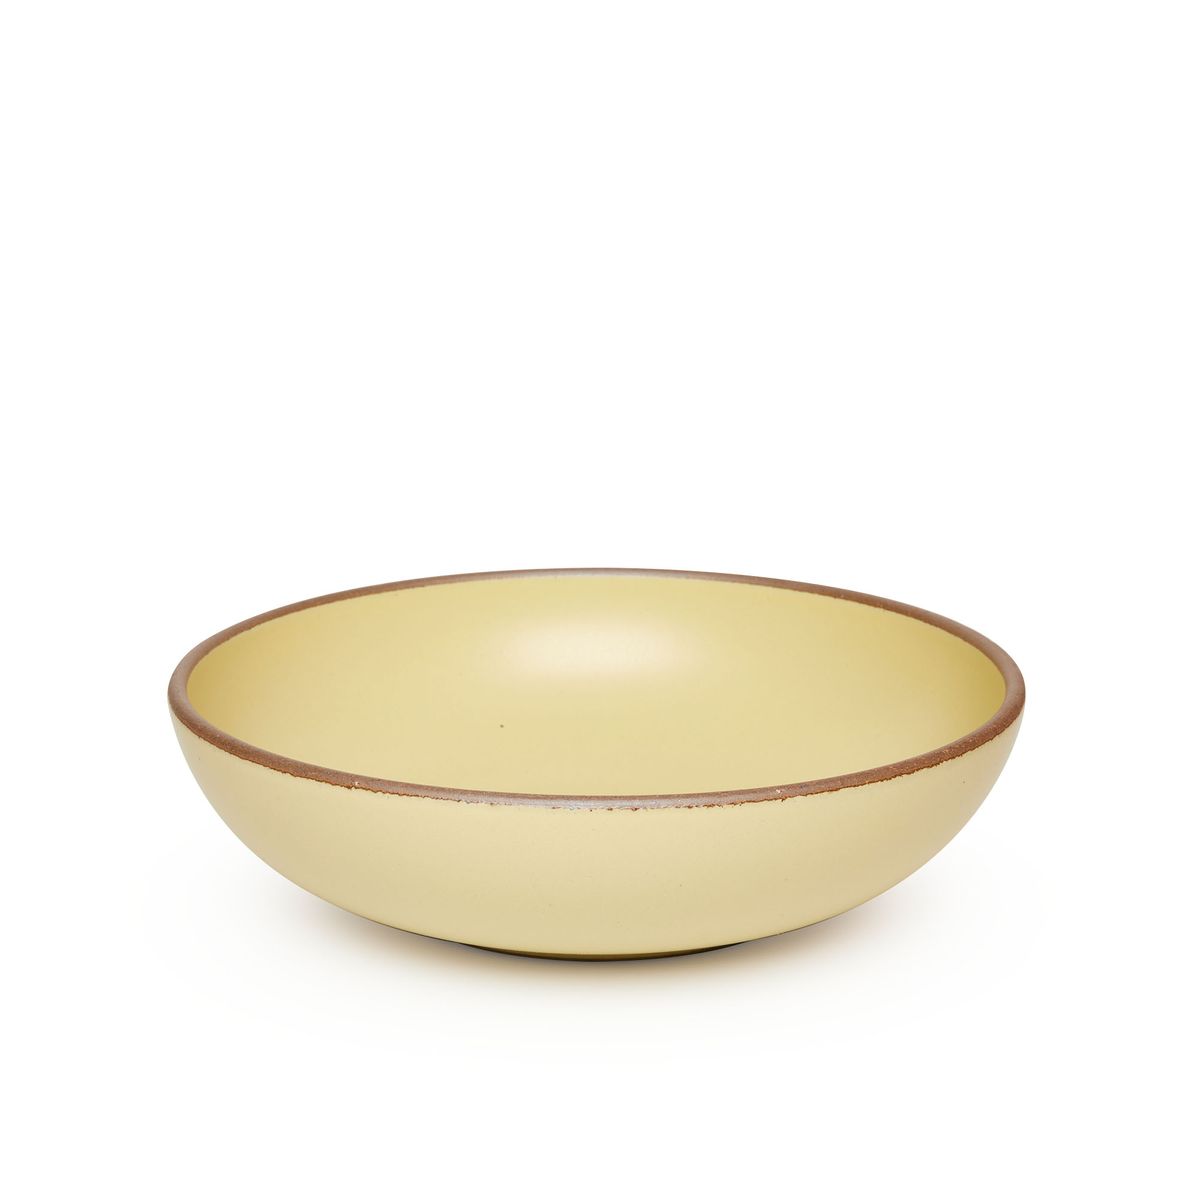 A large shallow serving ceramic bowl in a light butter yellow color featuring iron speckles and an unglazed rim